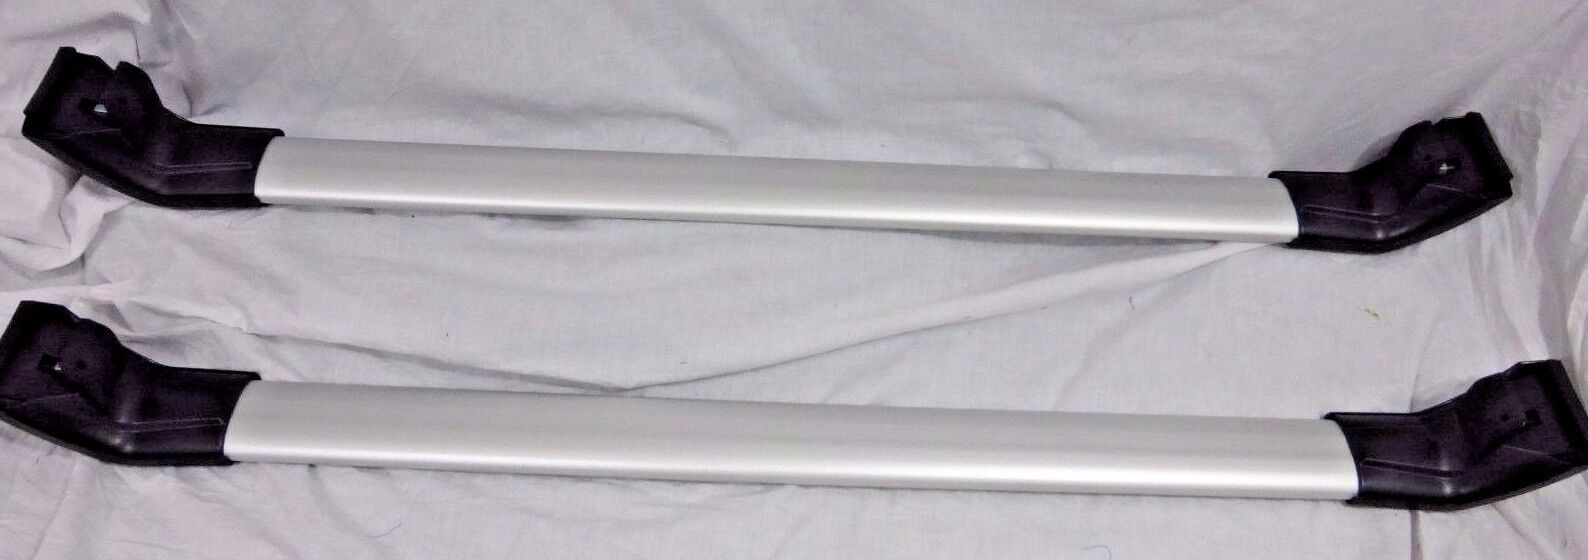 Land Rover OEM Discovery Sport L550 Cross Bar Roof Rack Silver Brand New